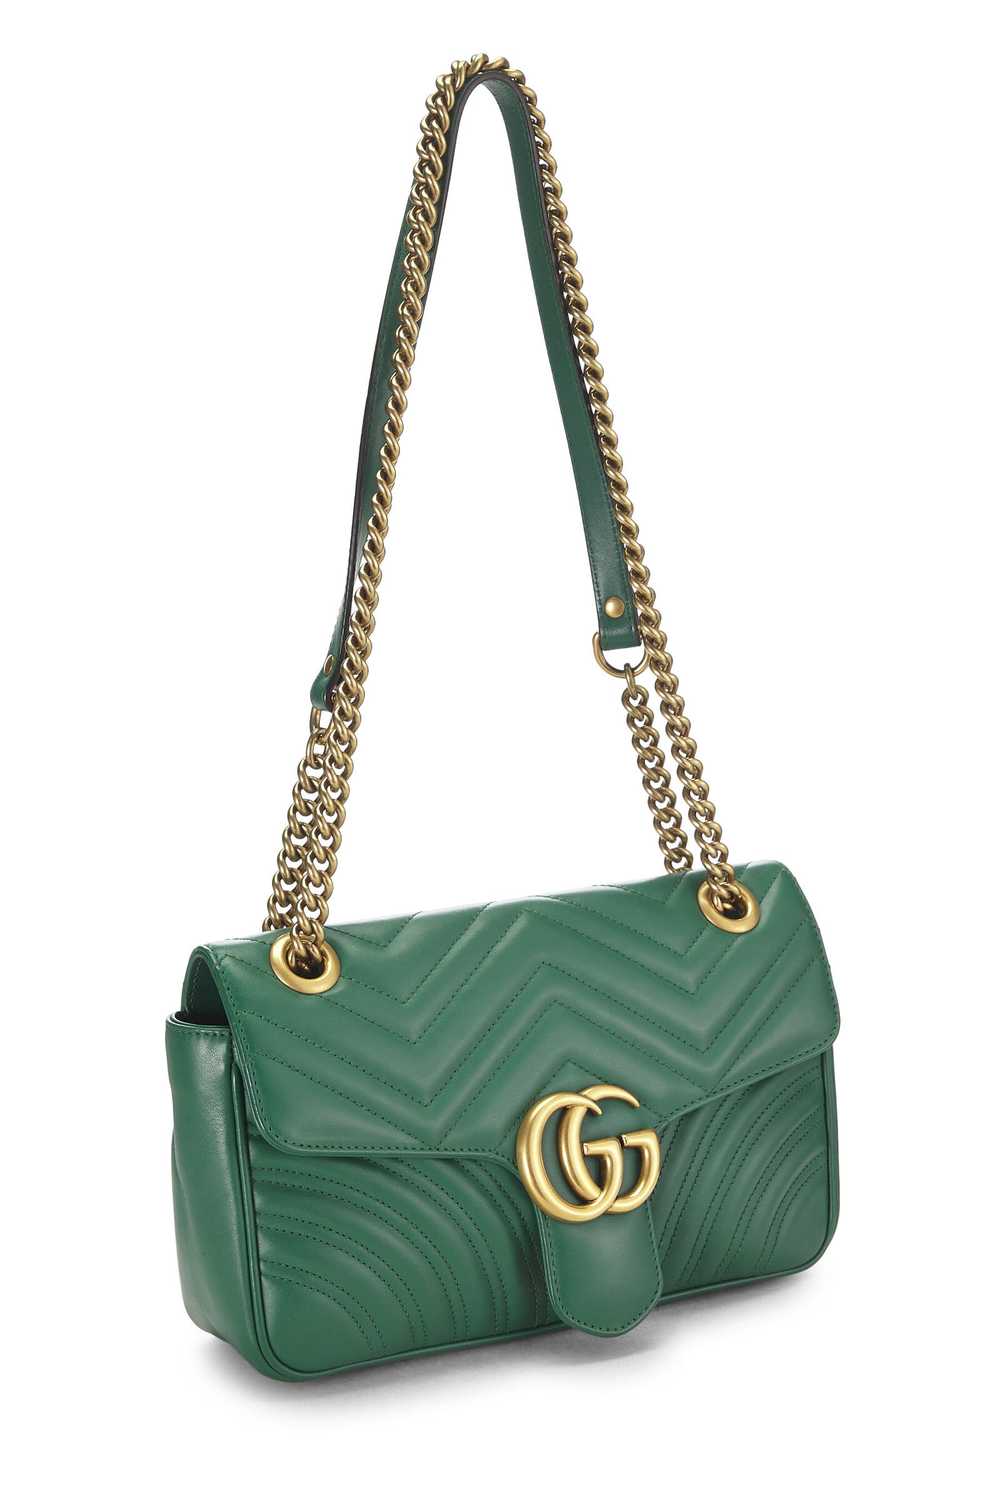 Green Leather GG Marmont Shoulder Bag Small - image 2